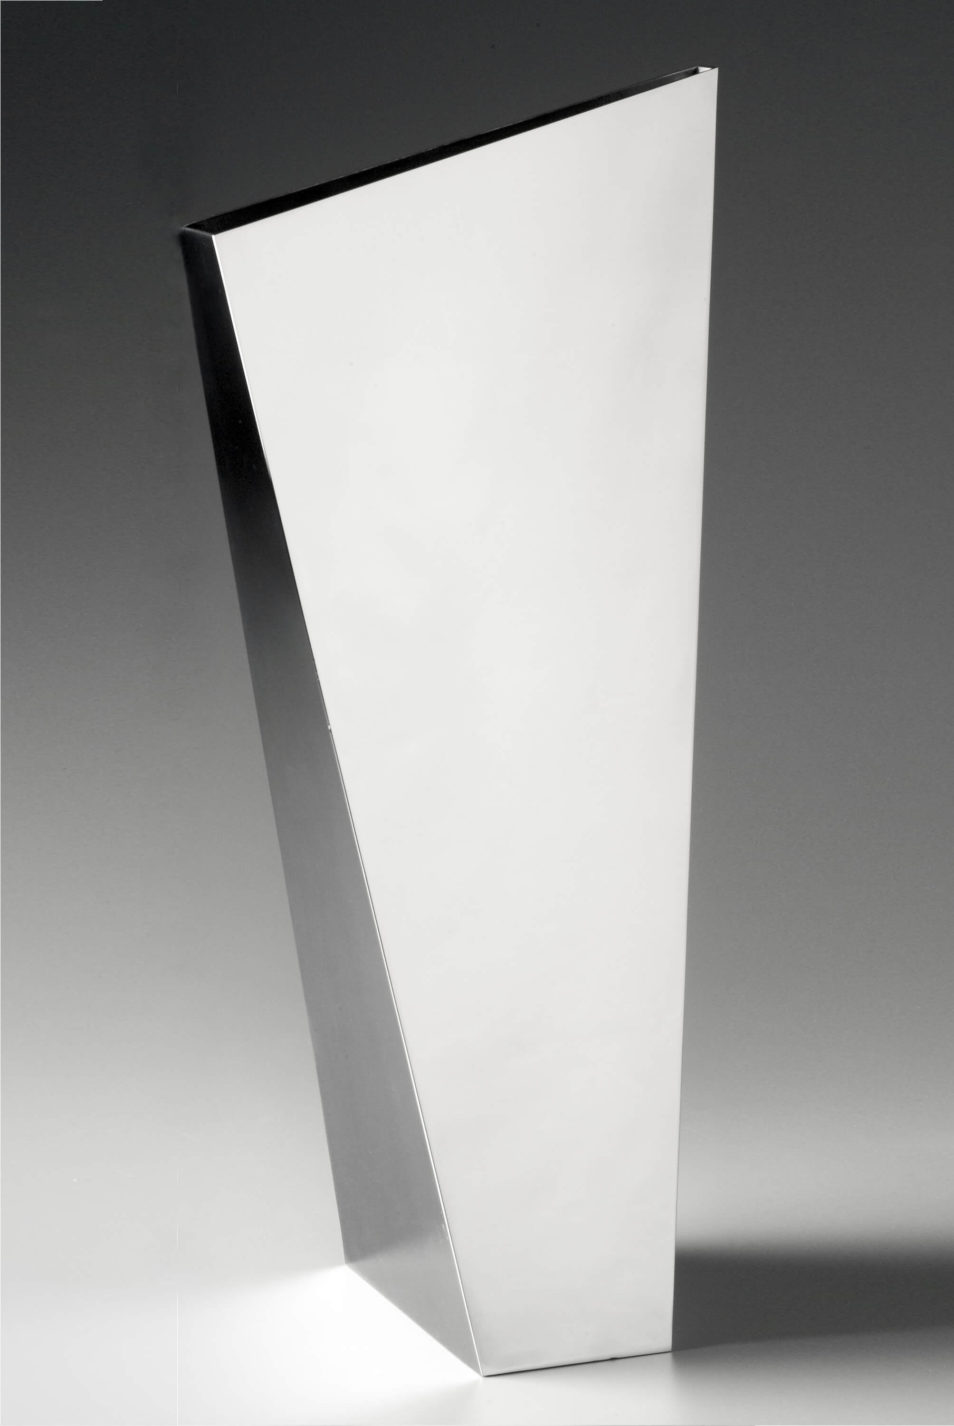 Angular metal vase, with every side a different-sized trapezoid.